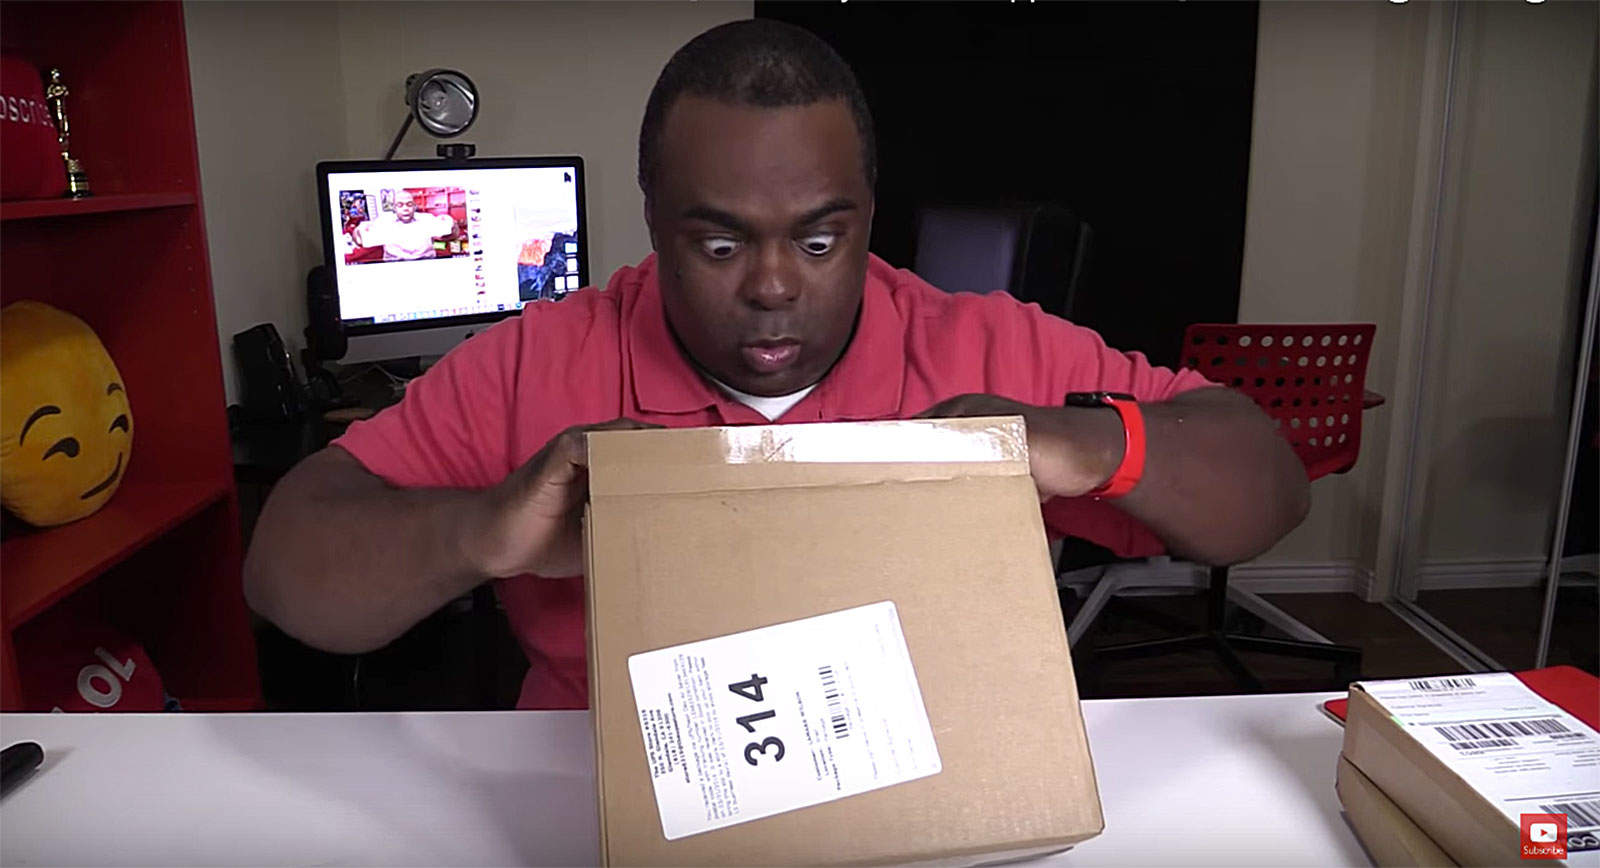 Lamarr Wilson does not have a good poker face, but has the kind of face for unboxing gadgets that makes him popular with his YouTube audience.